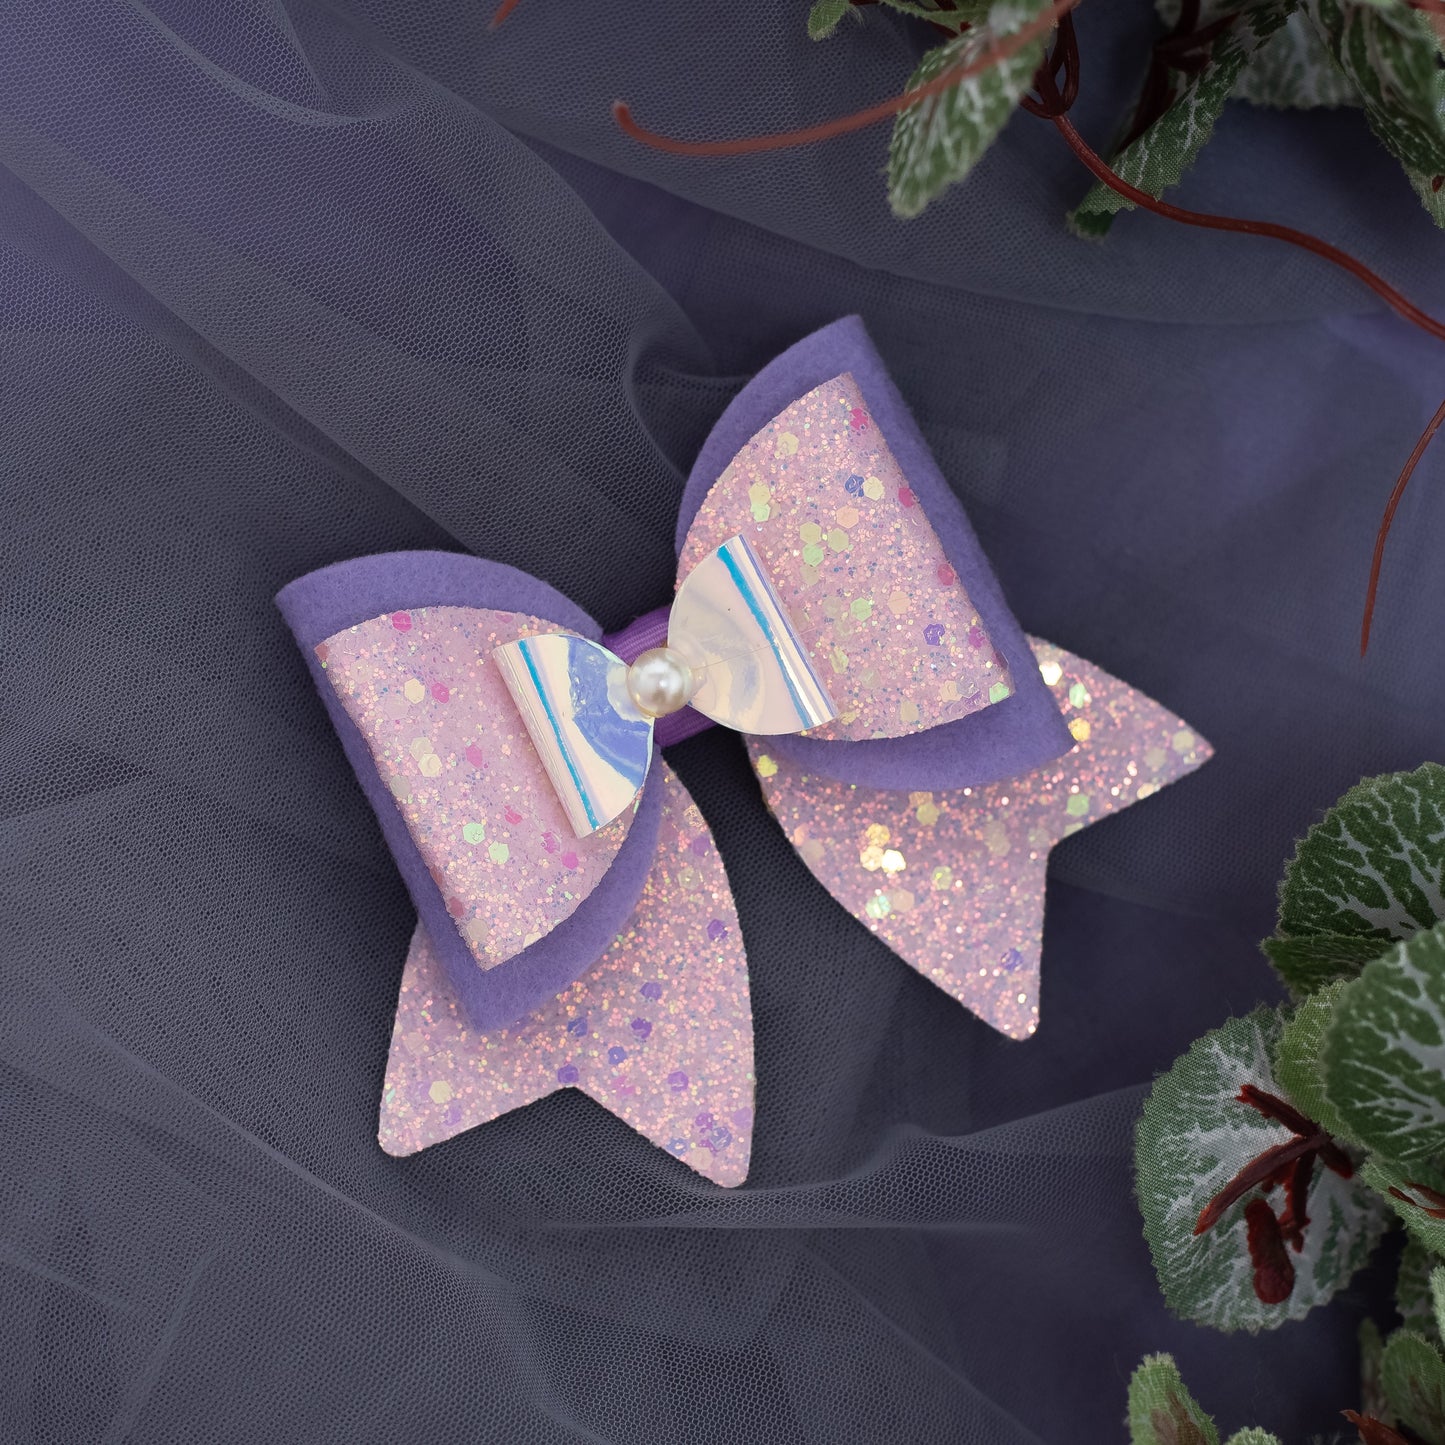 Large, Fancy Party Bow with Shimmer on Alligator Clip- Light Pink